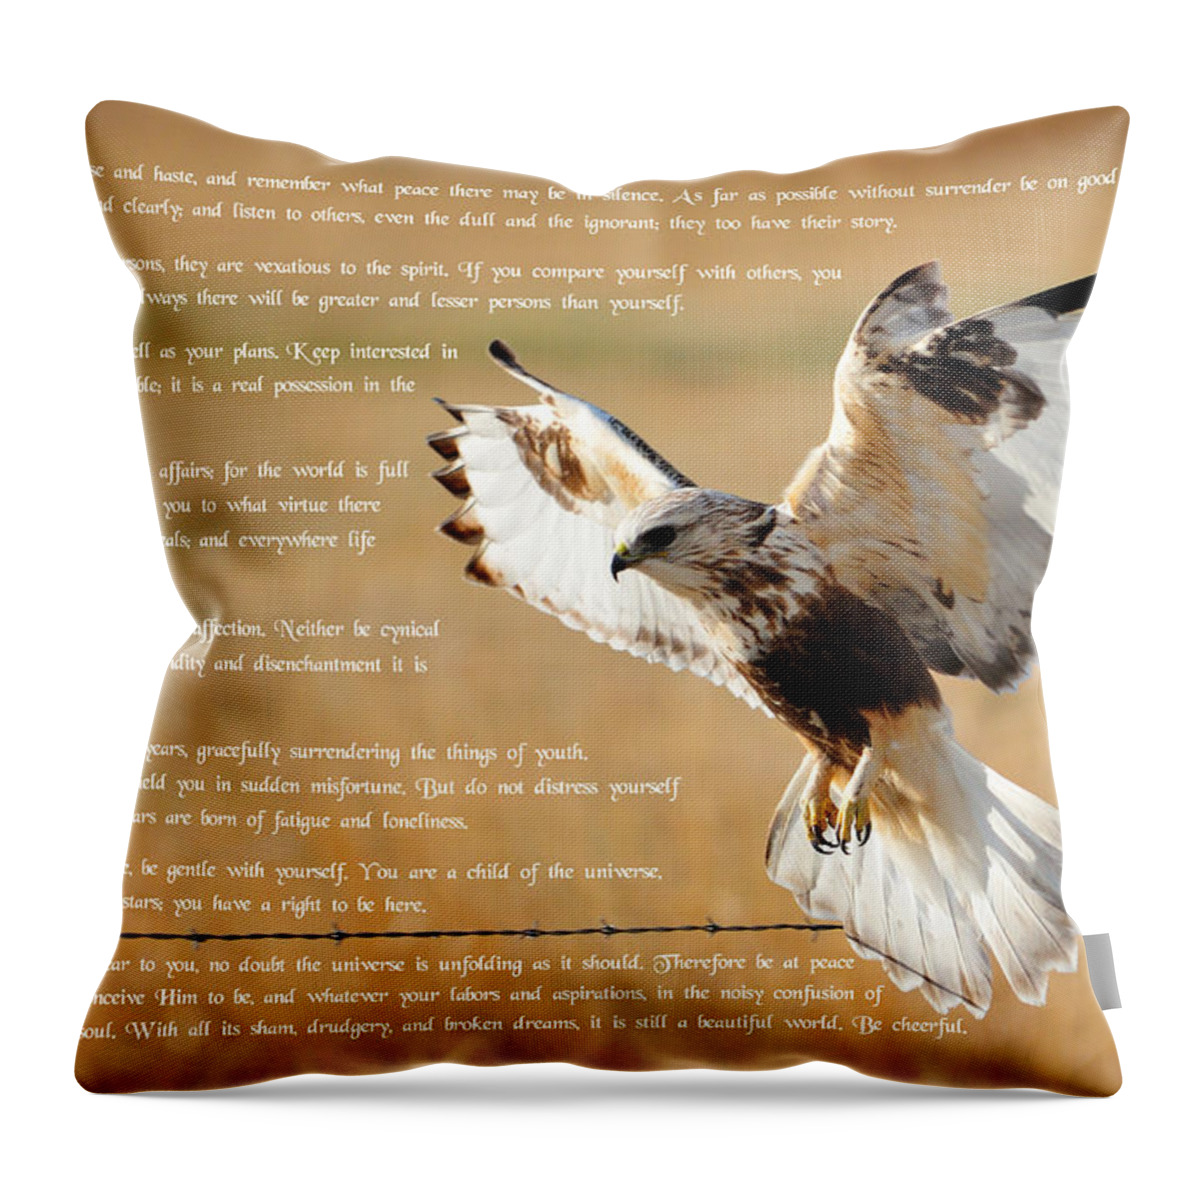 Desiderata Throw Pillow featuring the photograph The Desiderata with Hawk by Greg Norrell